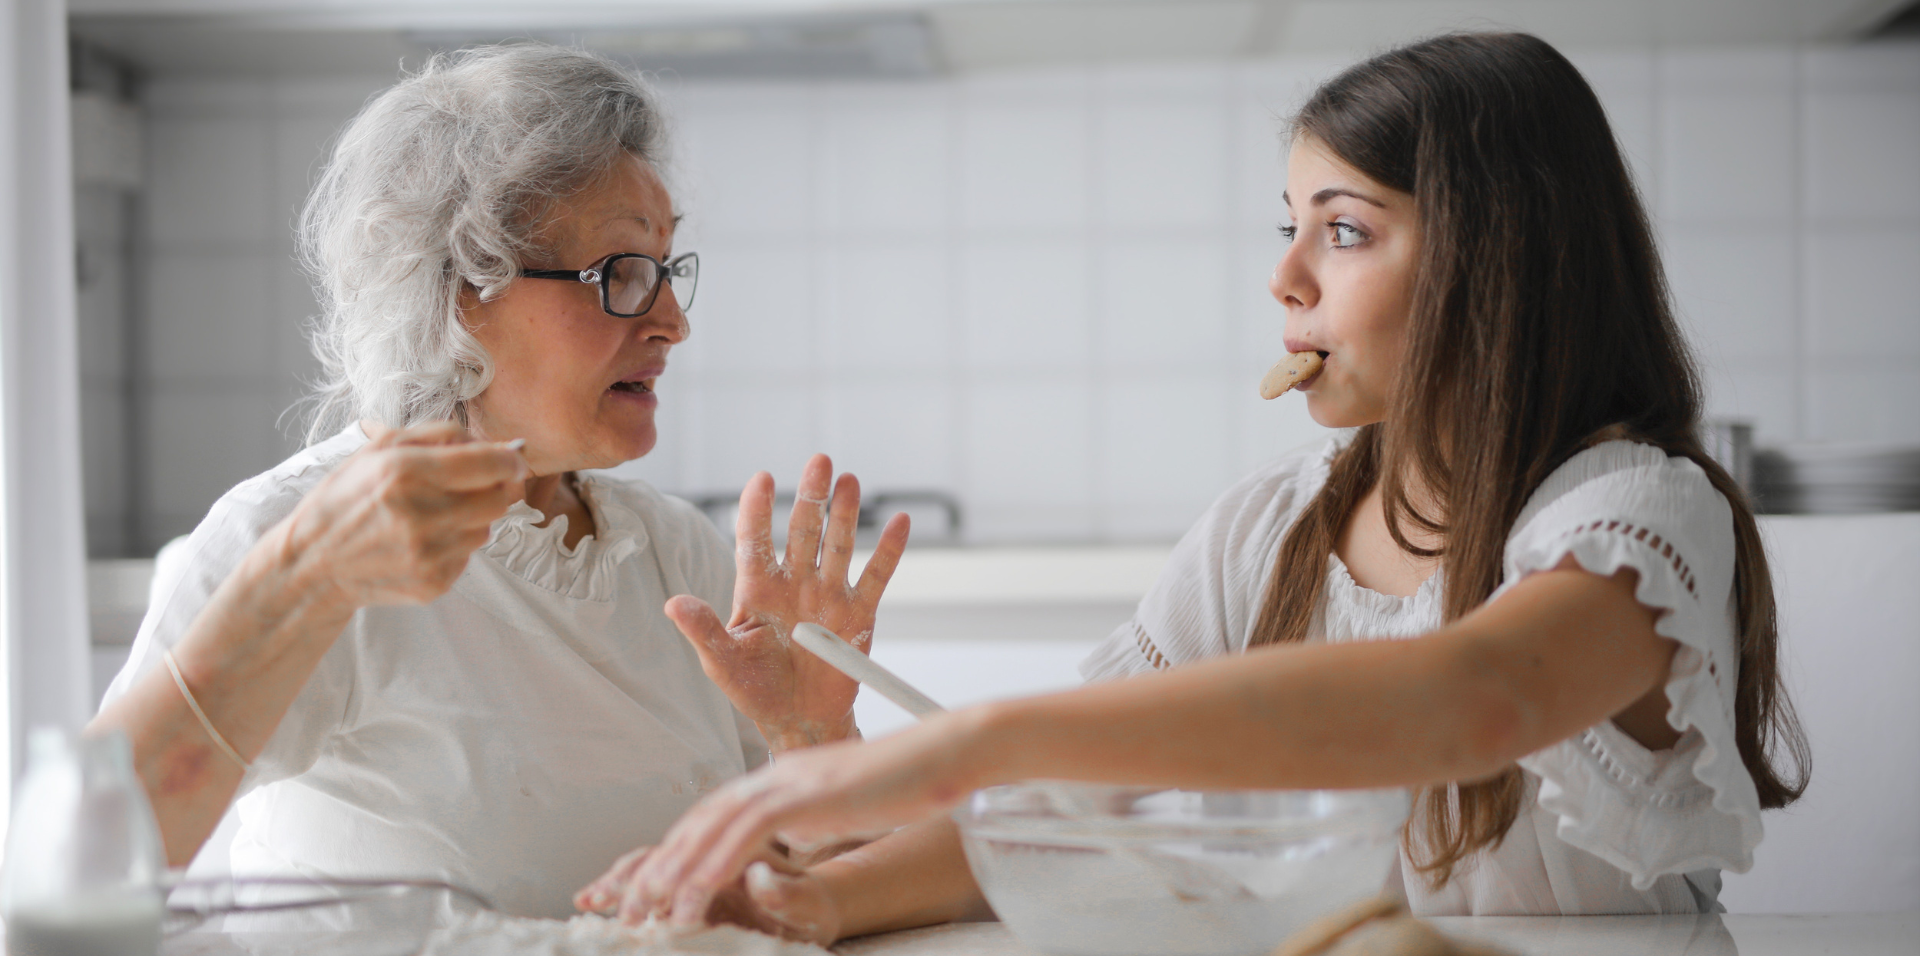 A grandmother sits at a table with her granddaughter baking cookies. The grandmother's hands are covered in flour. They are looking at each other and the girl has a cookie in her mouth.